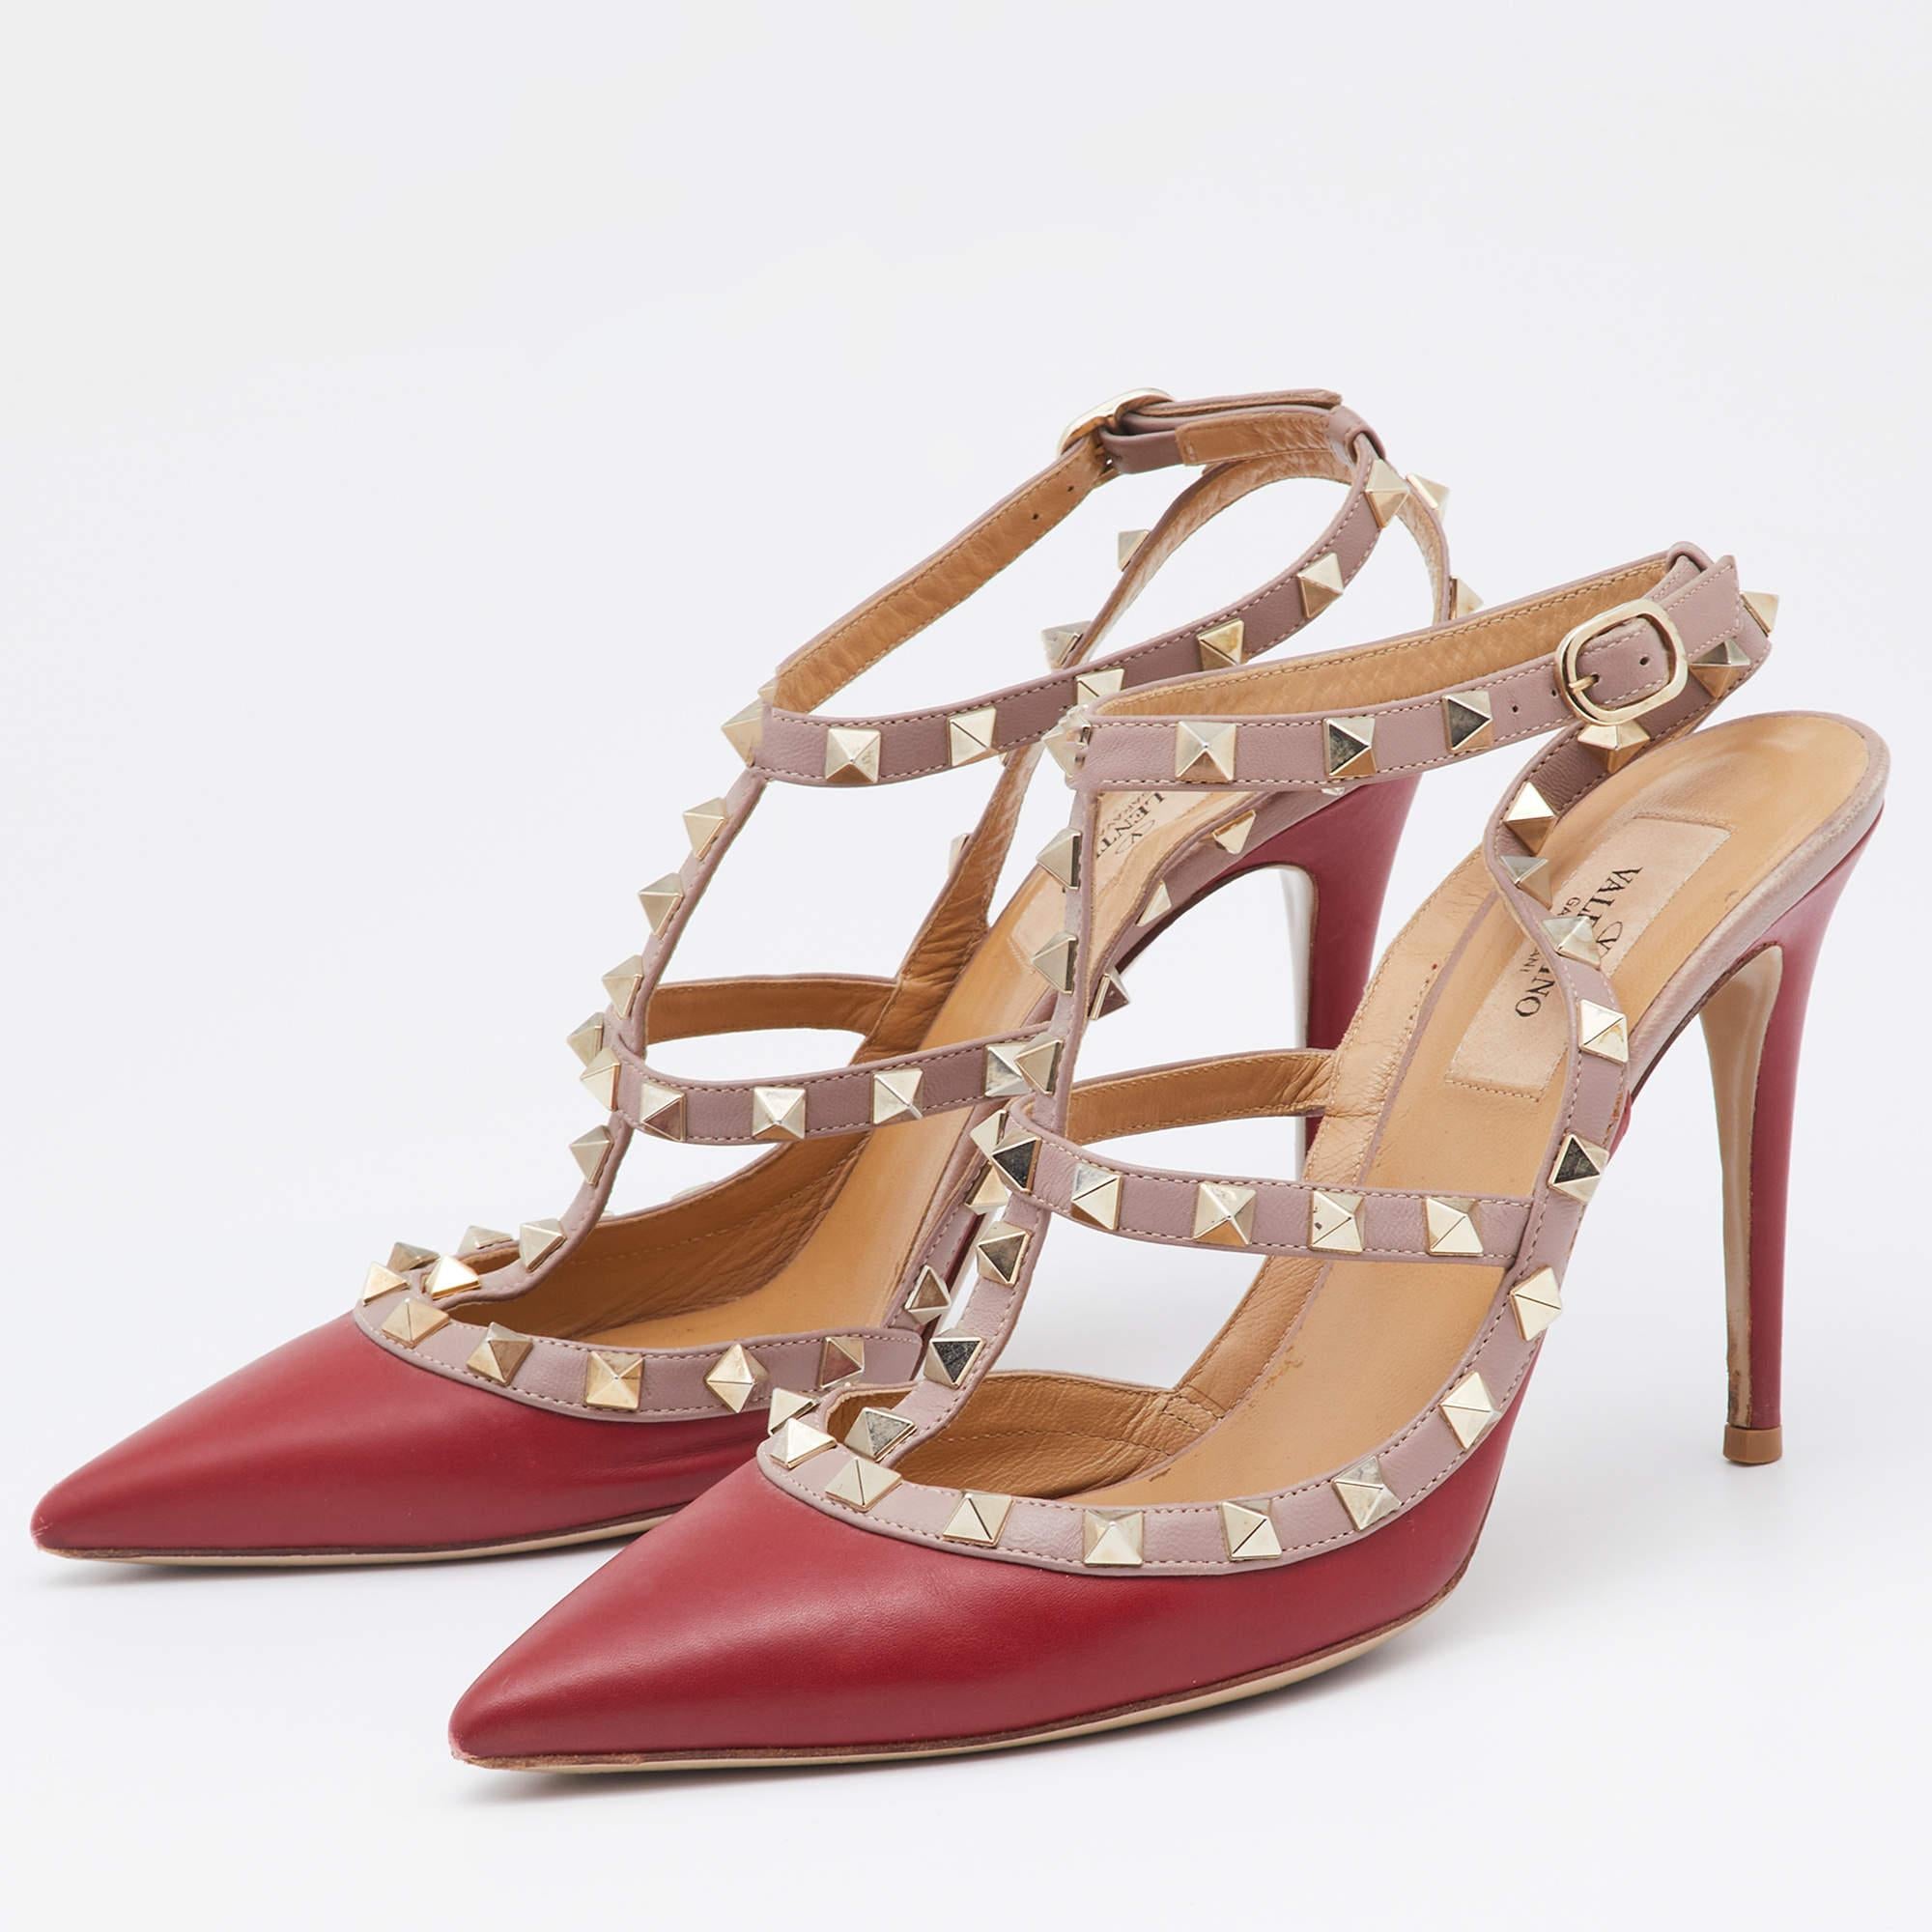 Women's Valentino Red/Pink Leather Rockstud Pumps Size 38.5